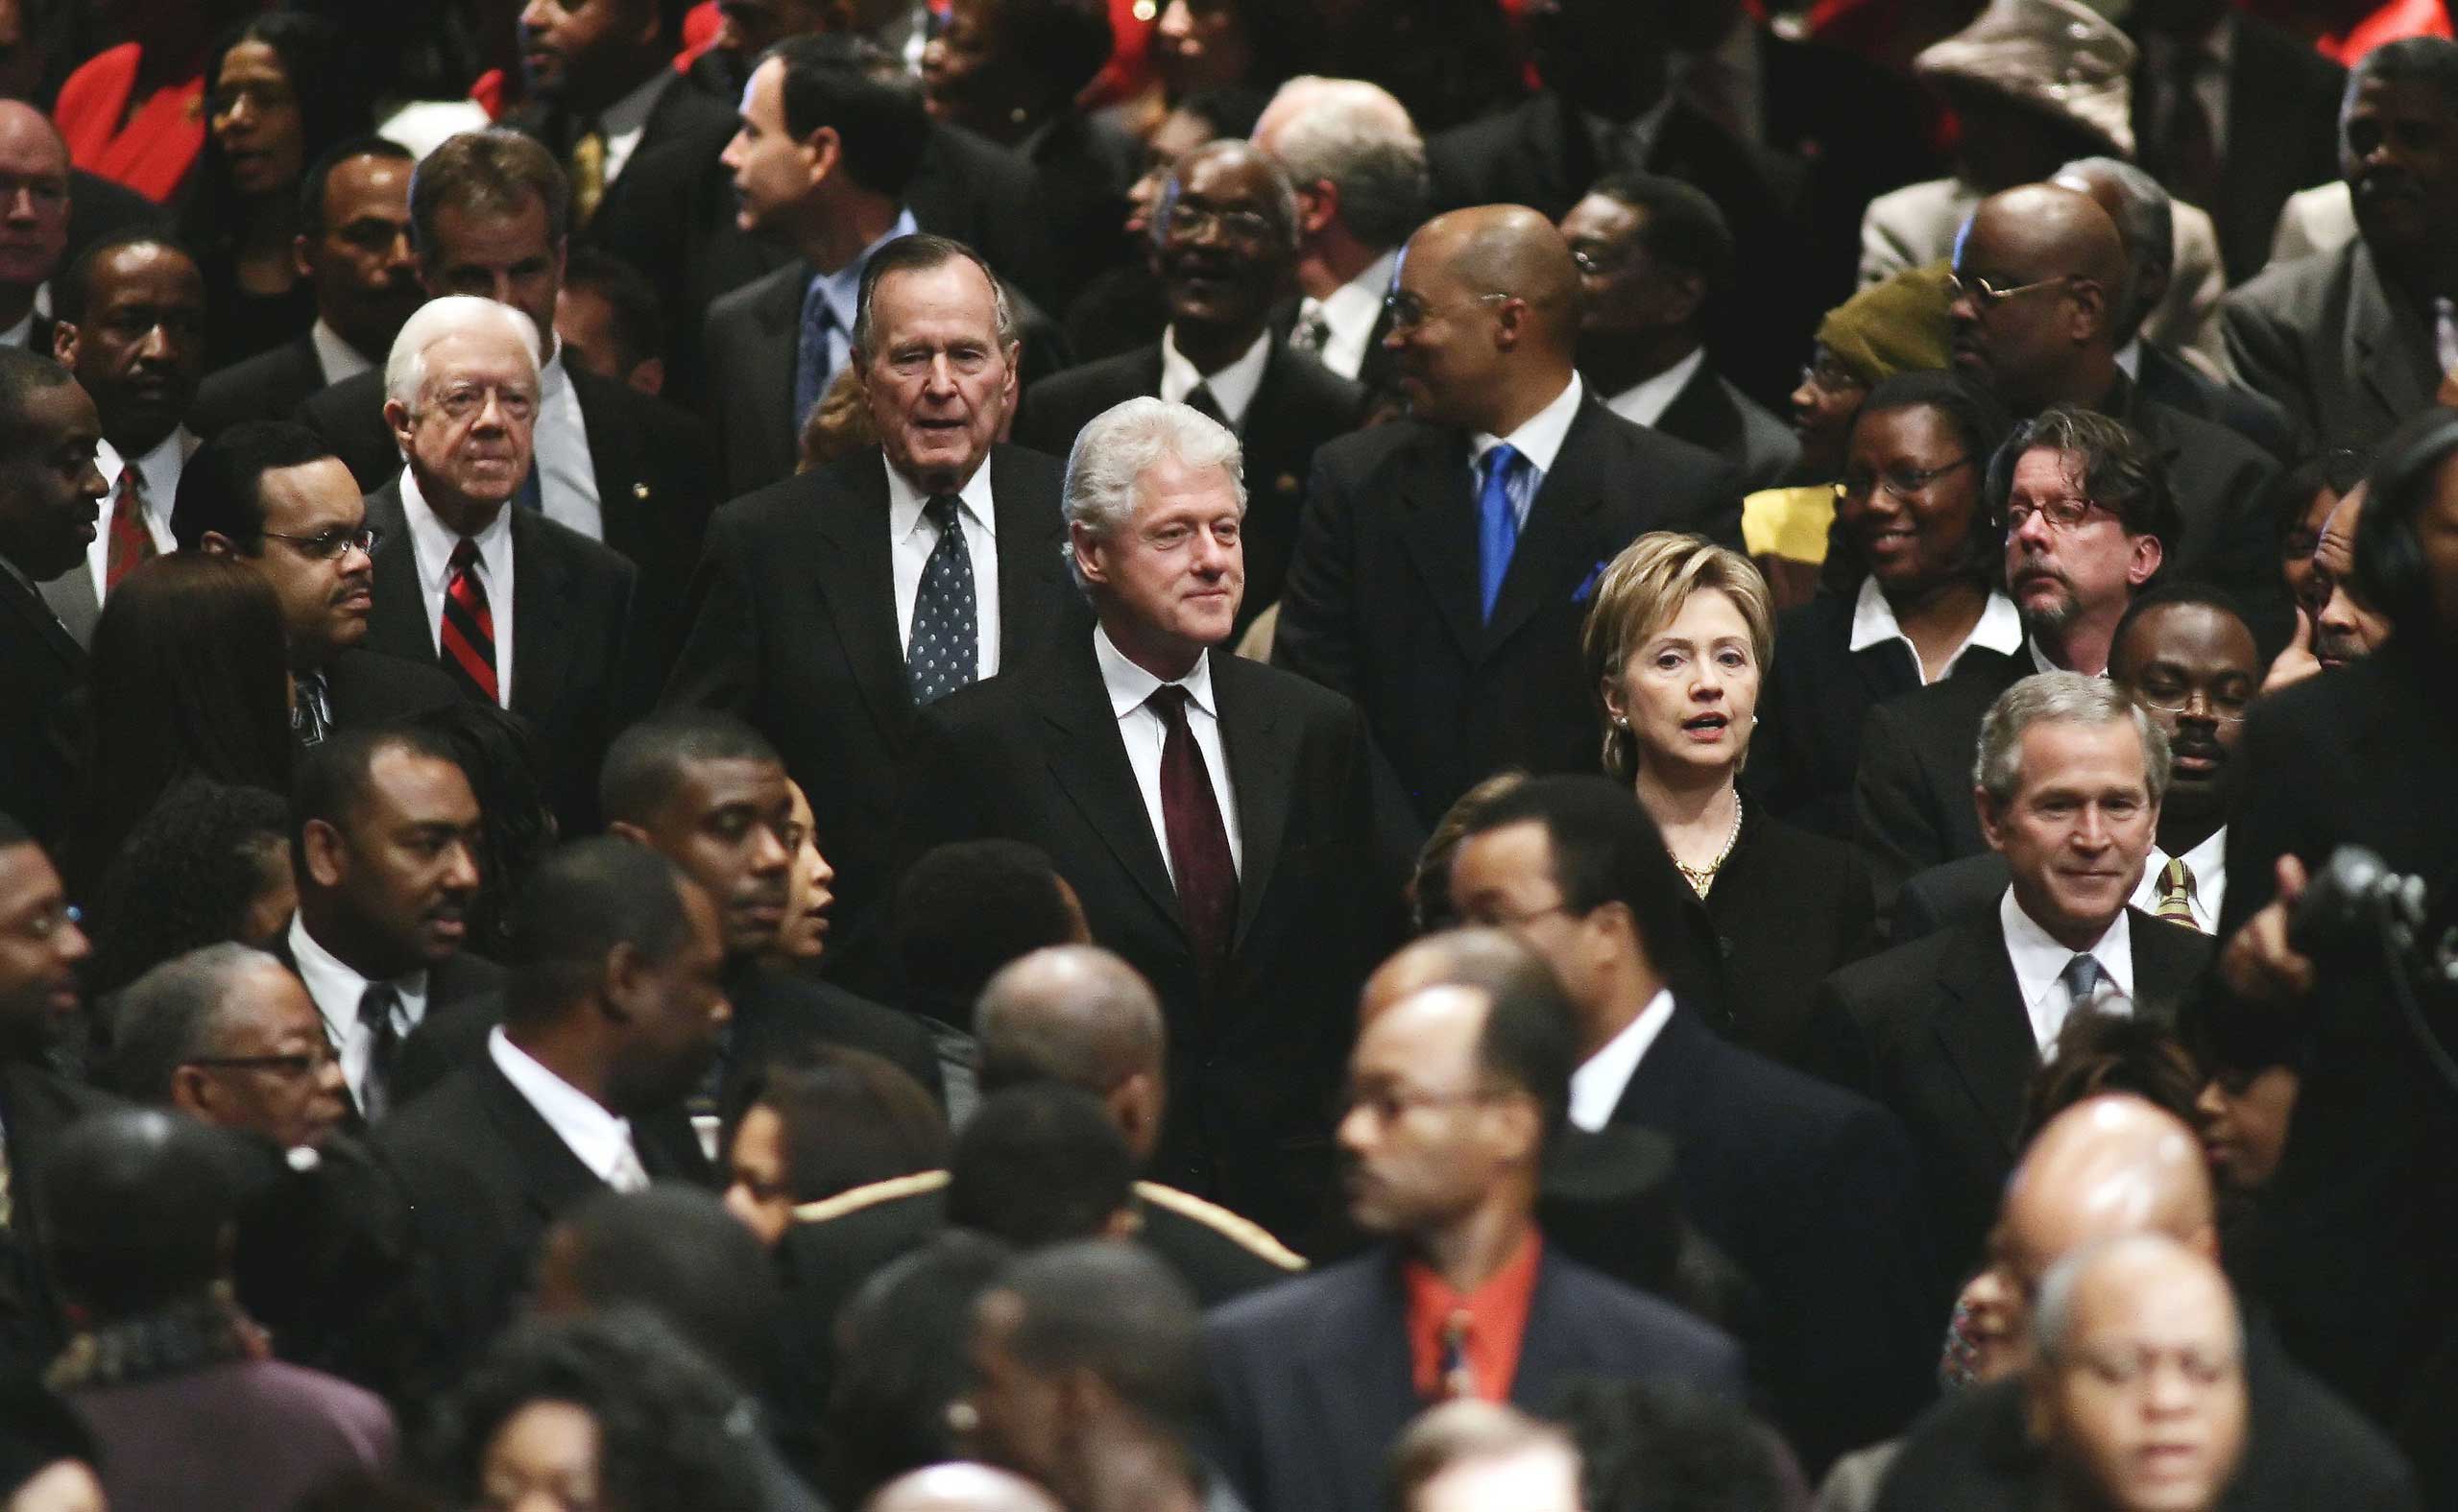 President George Bush, U.S. Sen. Hillary Clinton, former U.S. President Bill Clinton, former U.S. President George H. W. Bush, and former U.S. President Jimmy Carter walk through the crowd during the funeral for Coretta Scott King at the New  Birth Missionary Baptist Church in Lithonia, Ga. on Feb. 7, 2006. (Jason Reed—Pool/Getty Images)